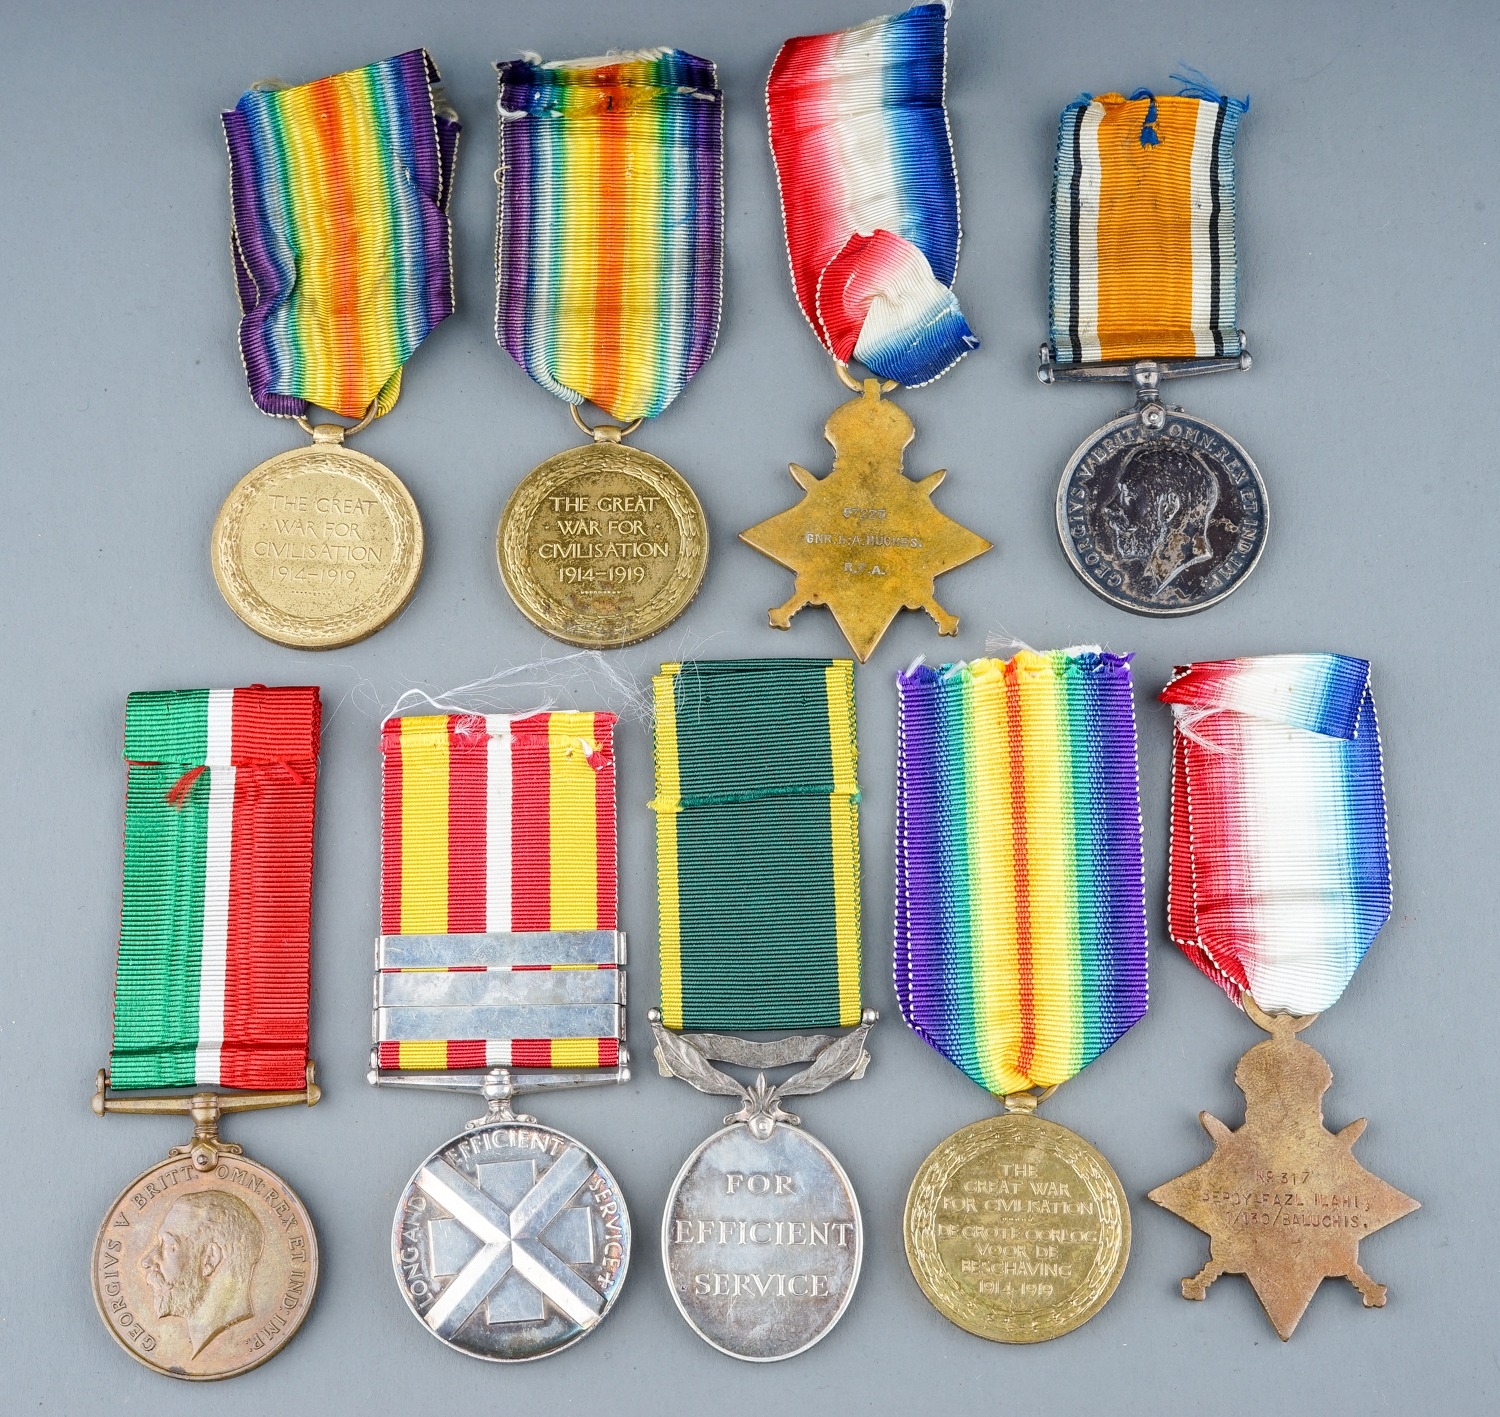 A collection of British Medals. Great War Pair - R-29124 A Cpl H H Simpkins K R Rif C. Condition - Image 12 of 12